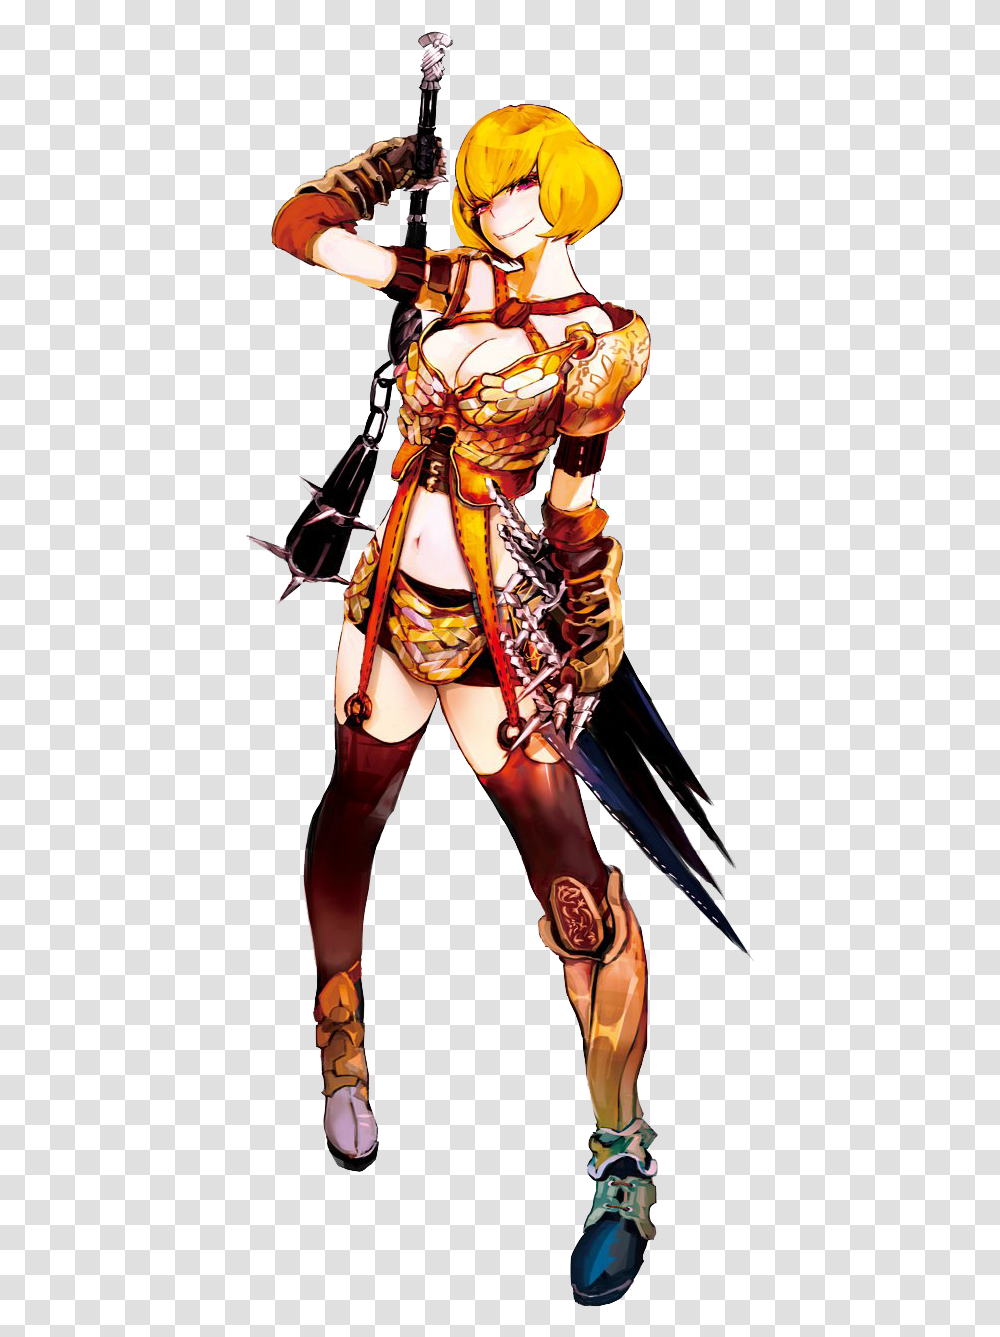 Overlord Anime Characters Overlord Anime Characters, Person, Human, Costume, Clothing Transparent Png